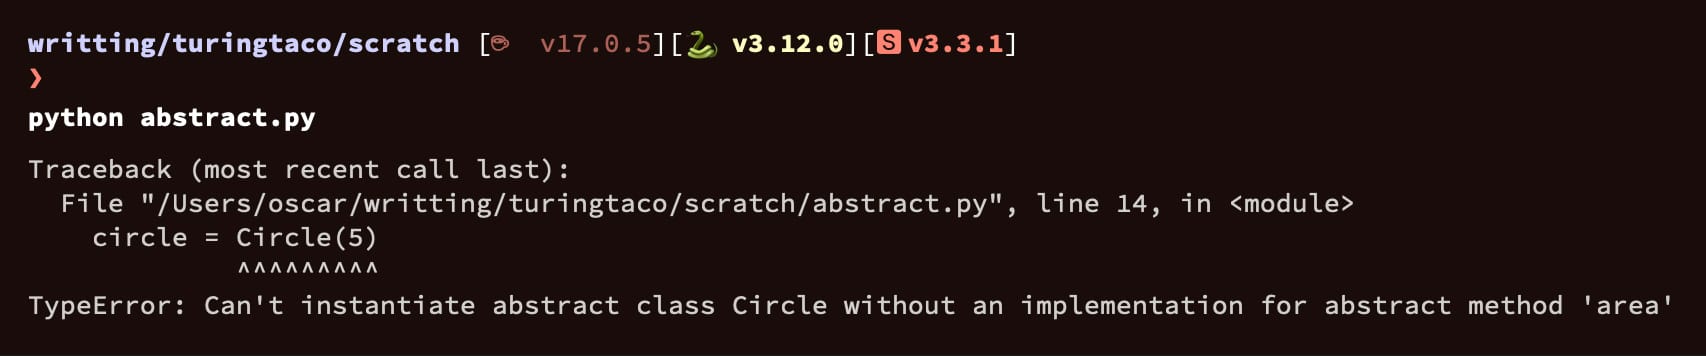 python reporting that an abstract class can't be instantiated.